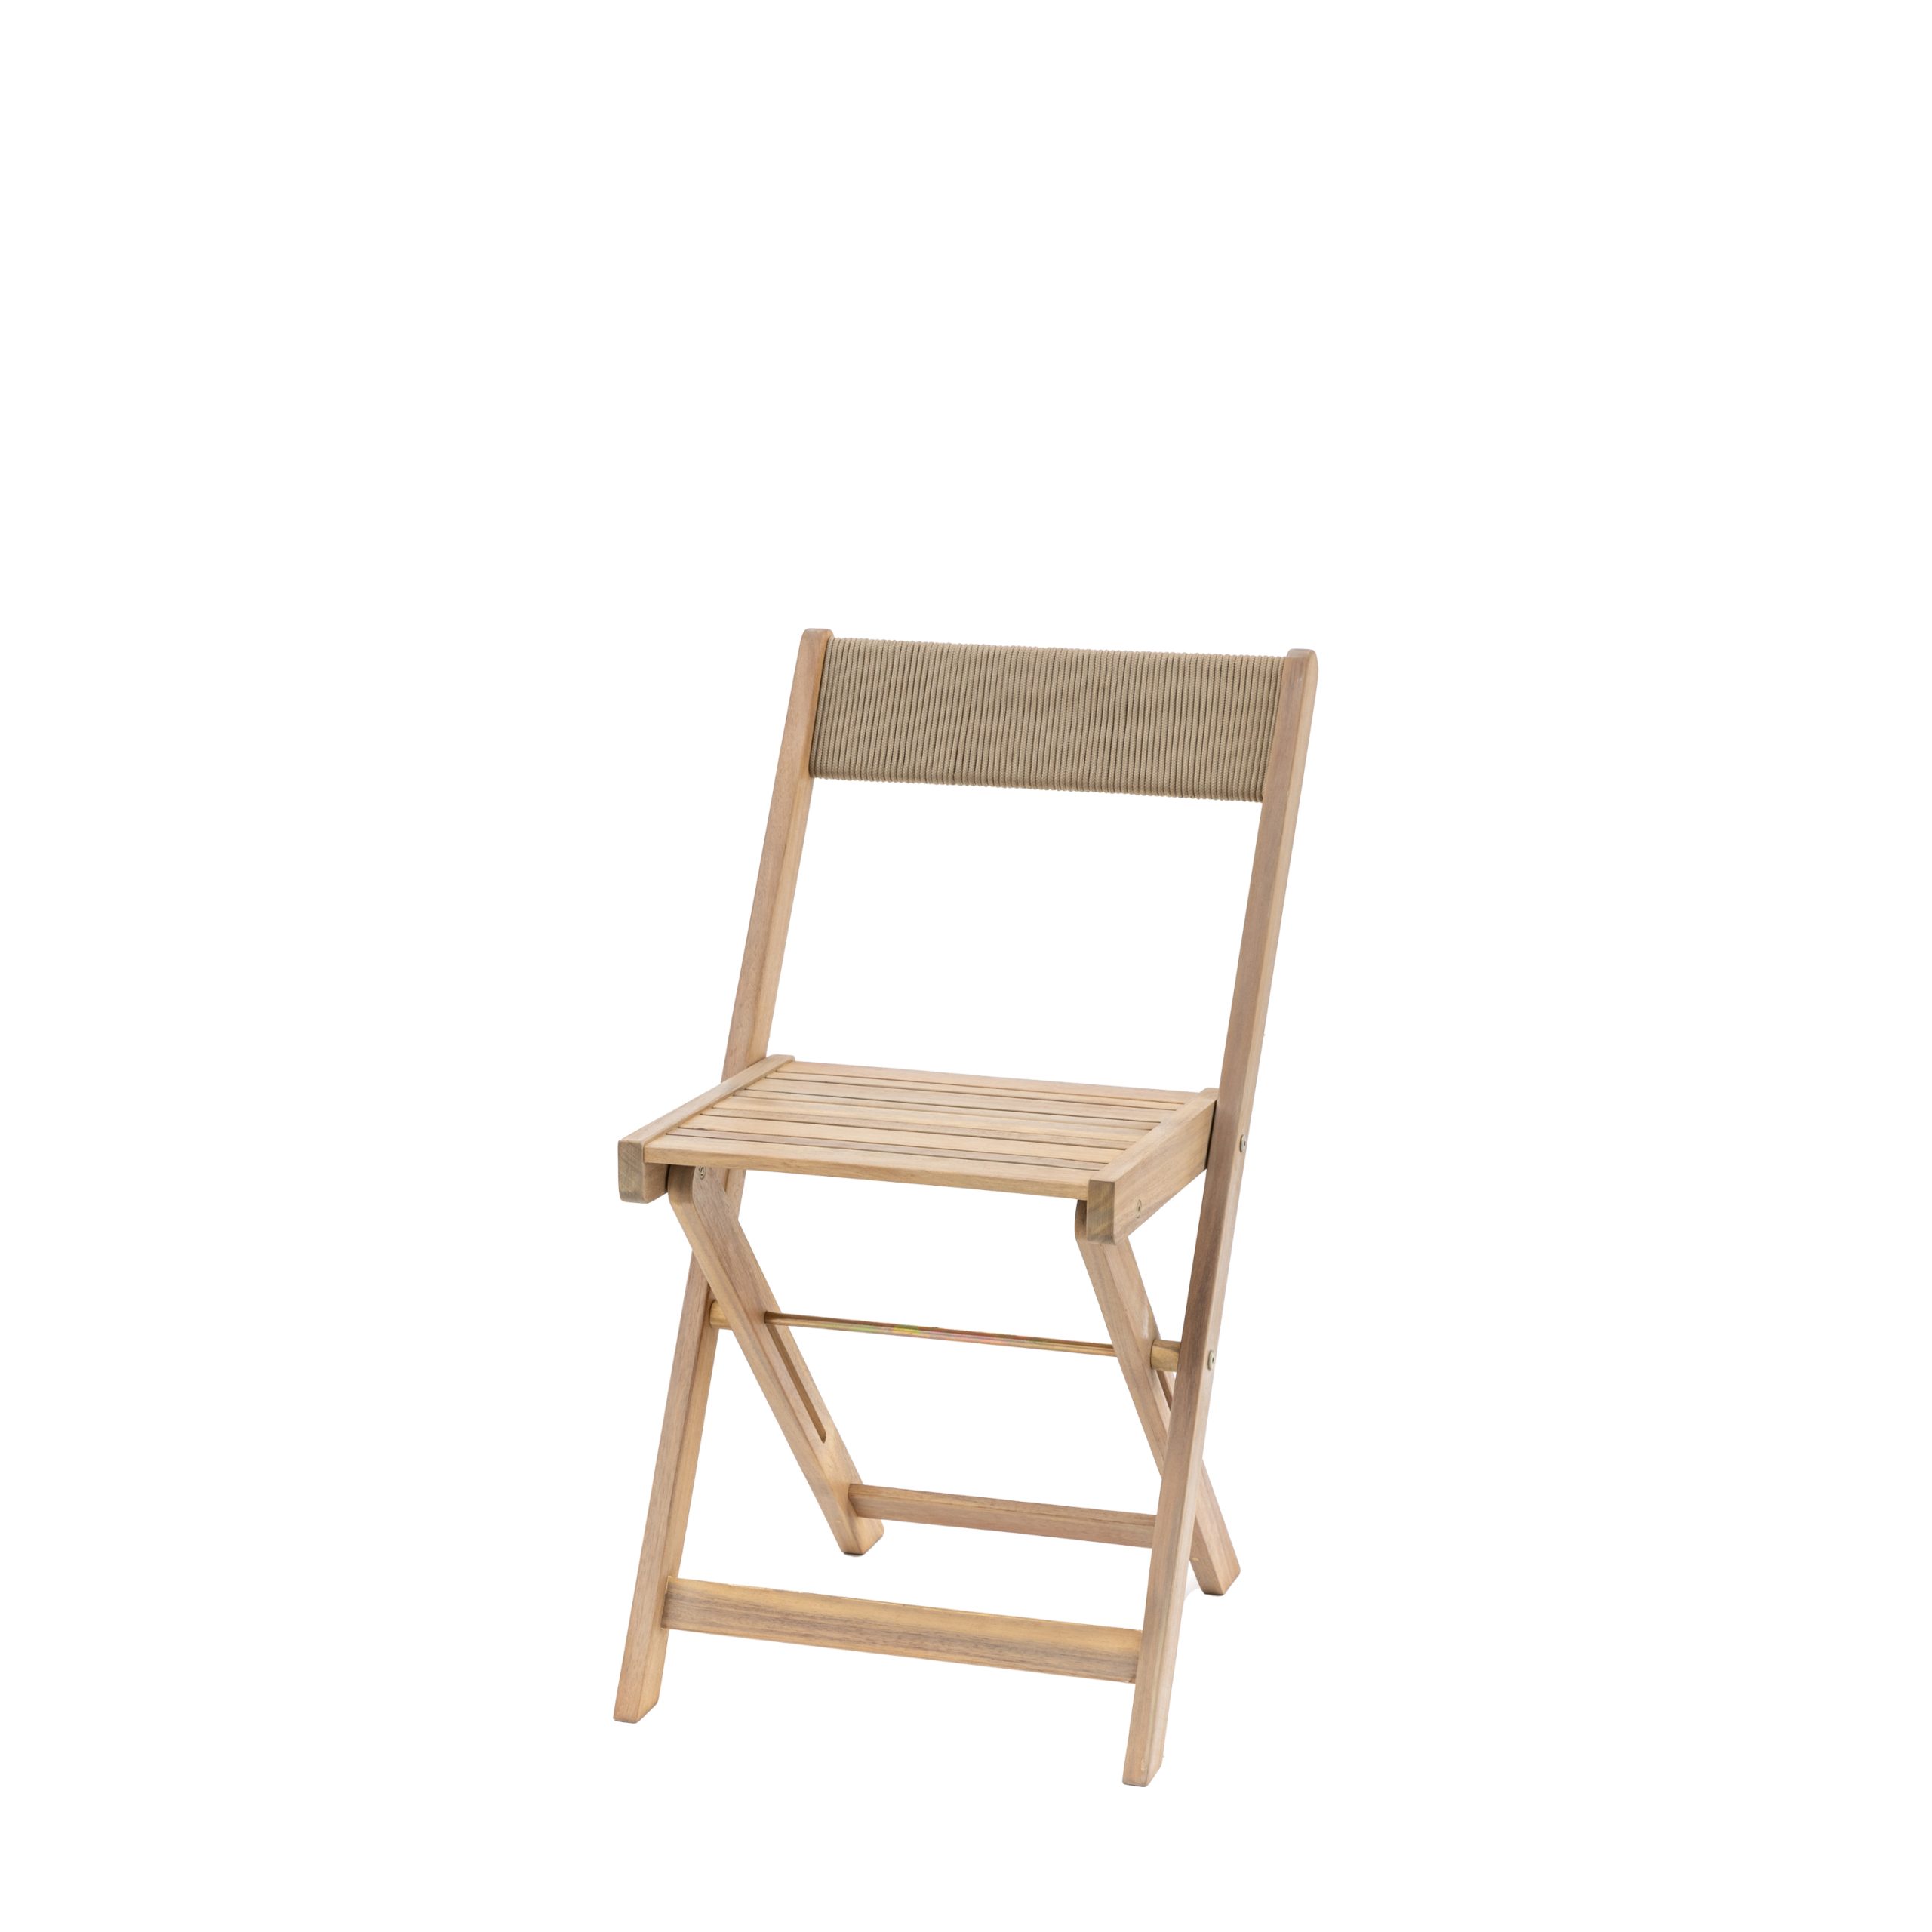 Gallery Outdoor Lindos Folding Chair Natural (2pk)